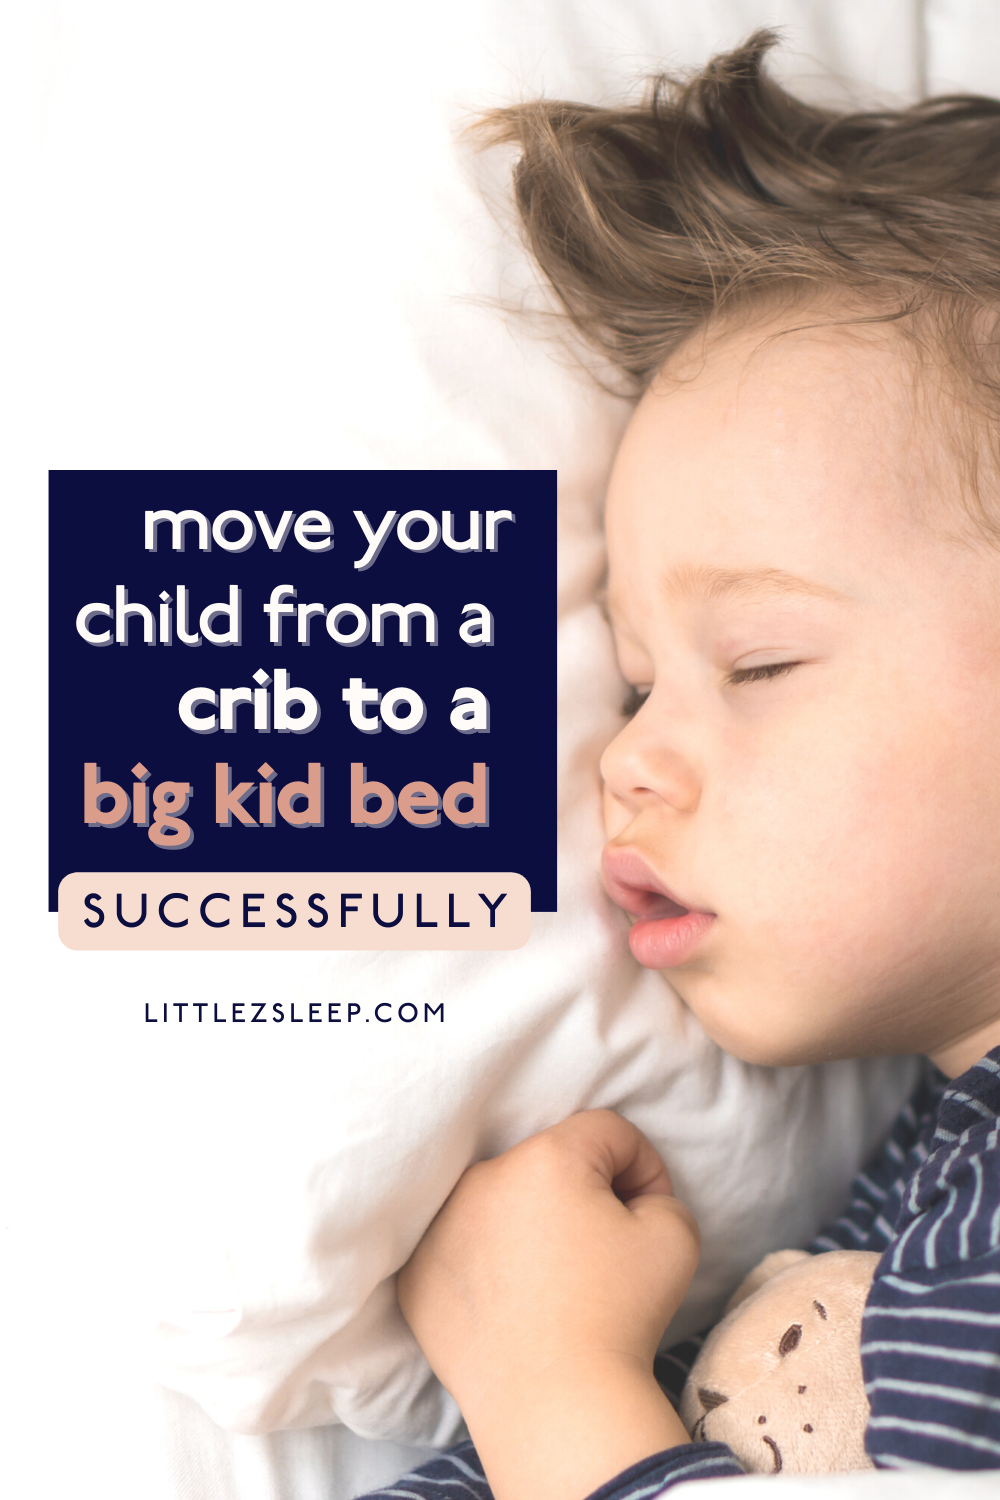 Move your child from a crib to a big kid bed successfully 